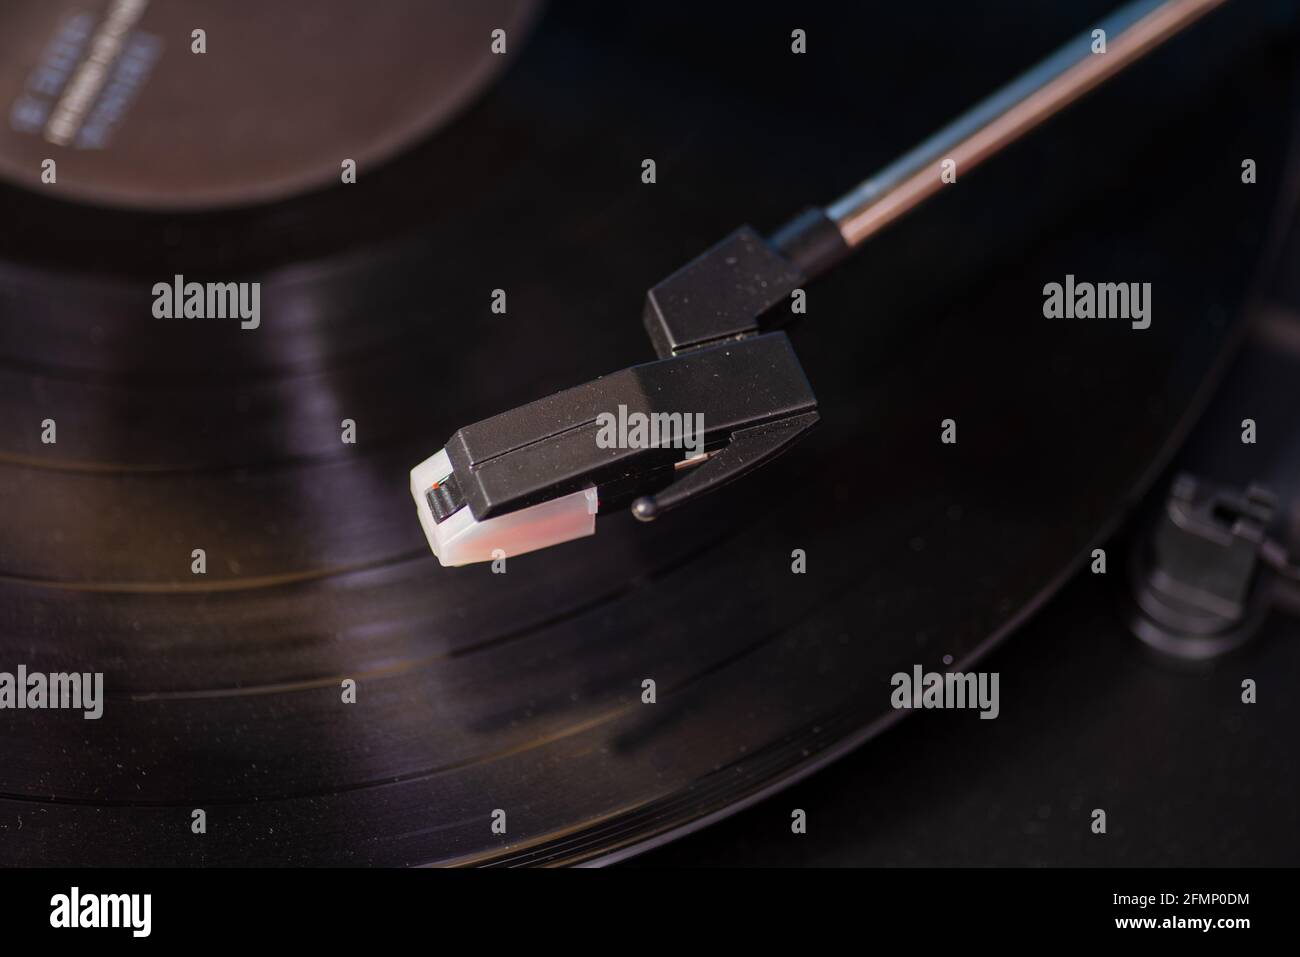 Vinyl record on player shot from above Stock Photo